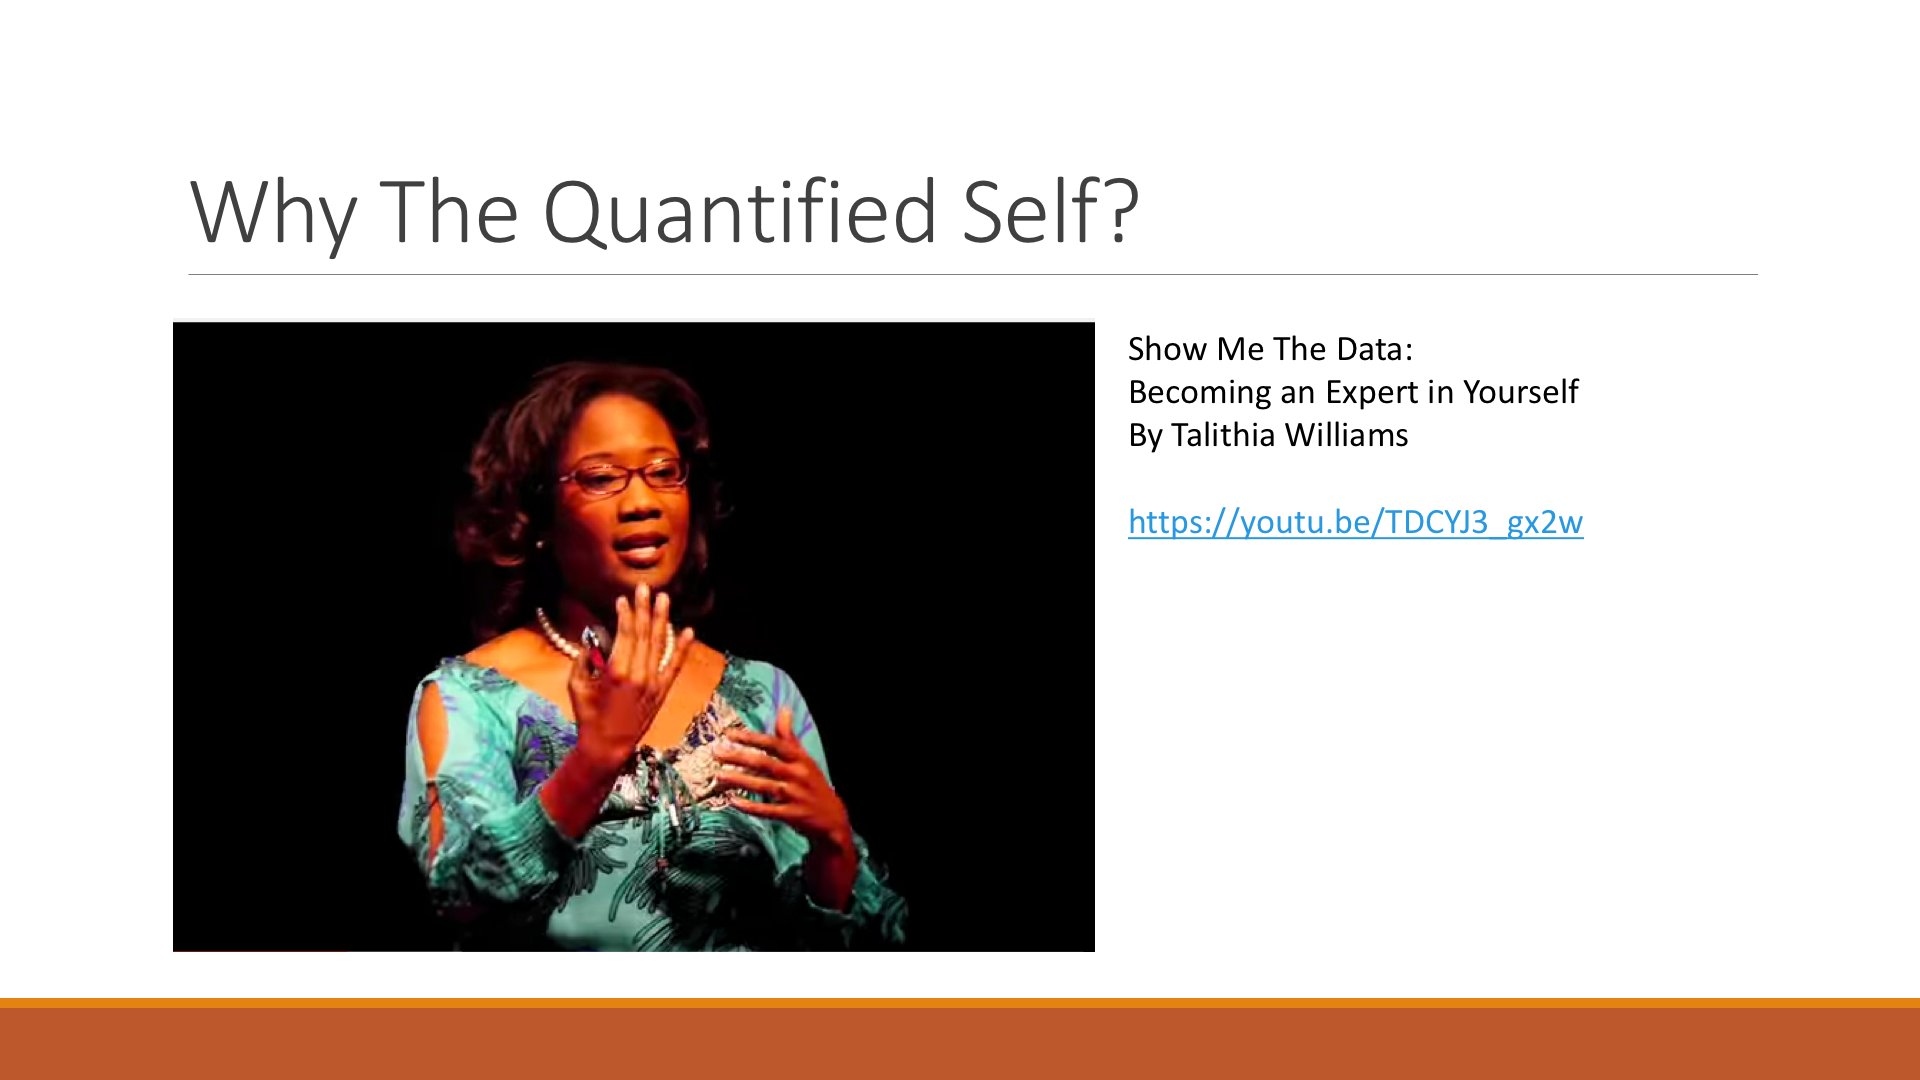 Why The Quantified Self